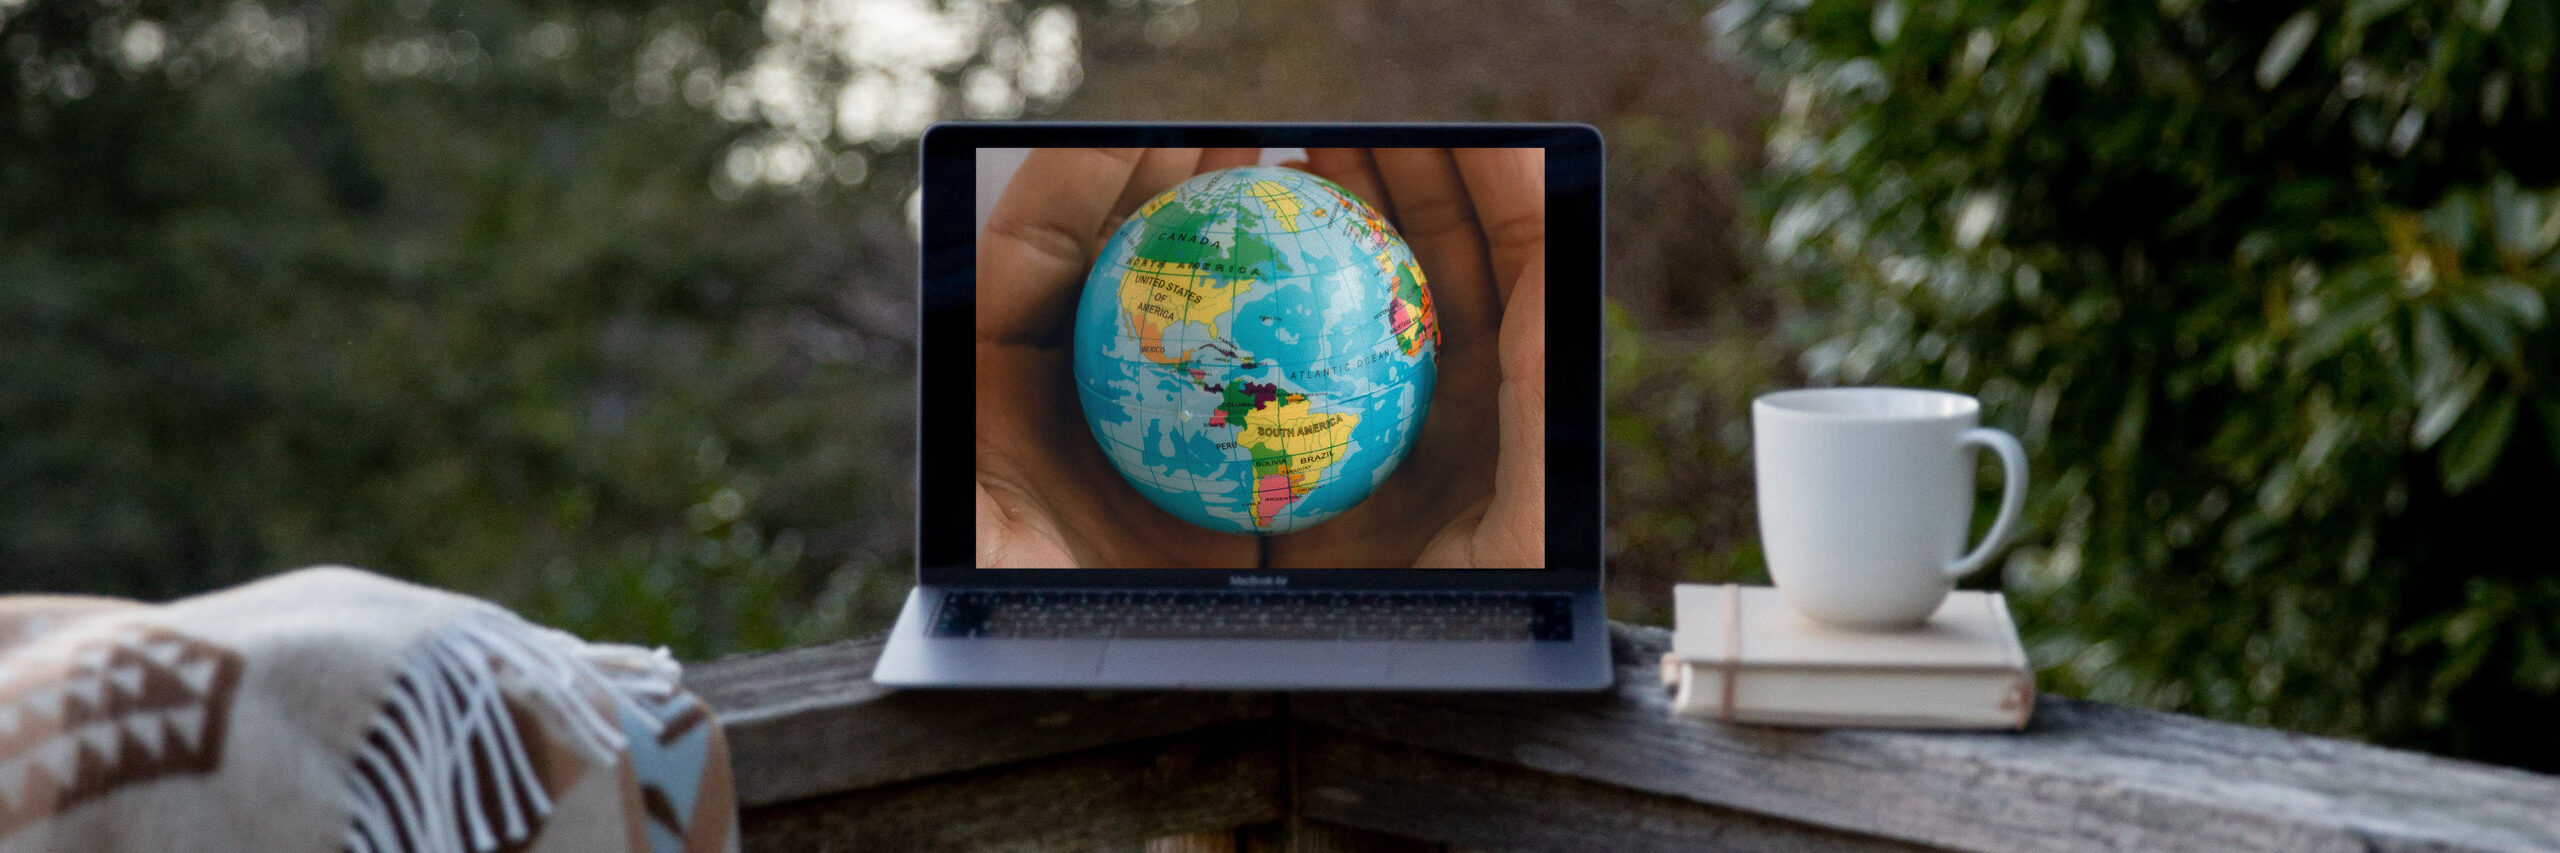 laptop with globe on screen